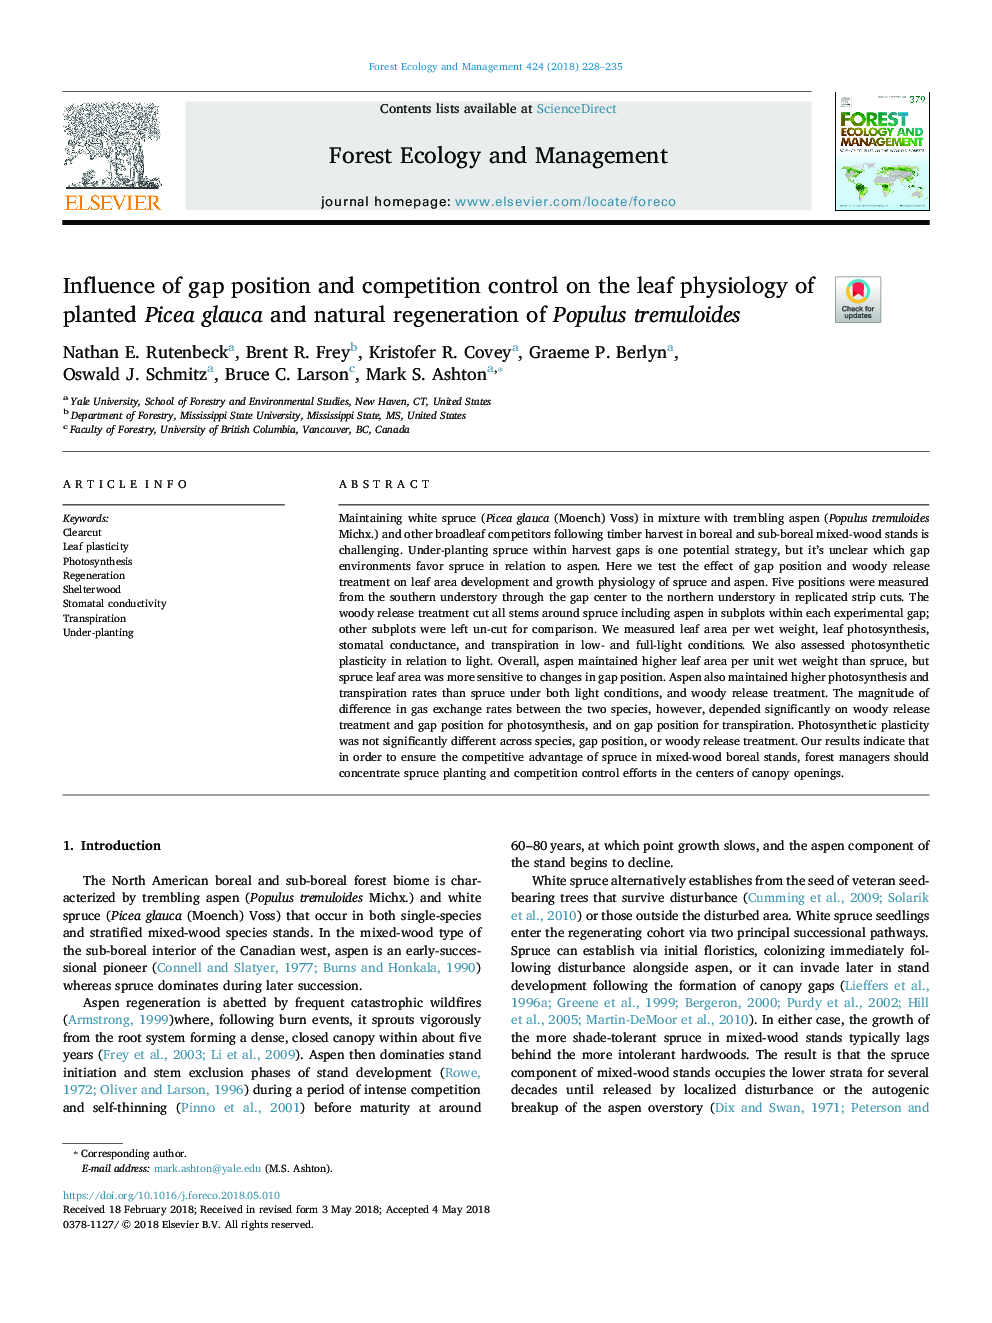 Influence of gap position and competition control on the leaf physiology of planted Picea glauca and natural regeneration of Populus tremuloides